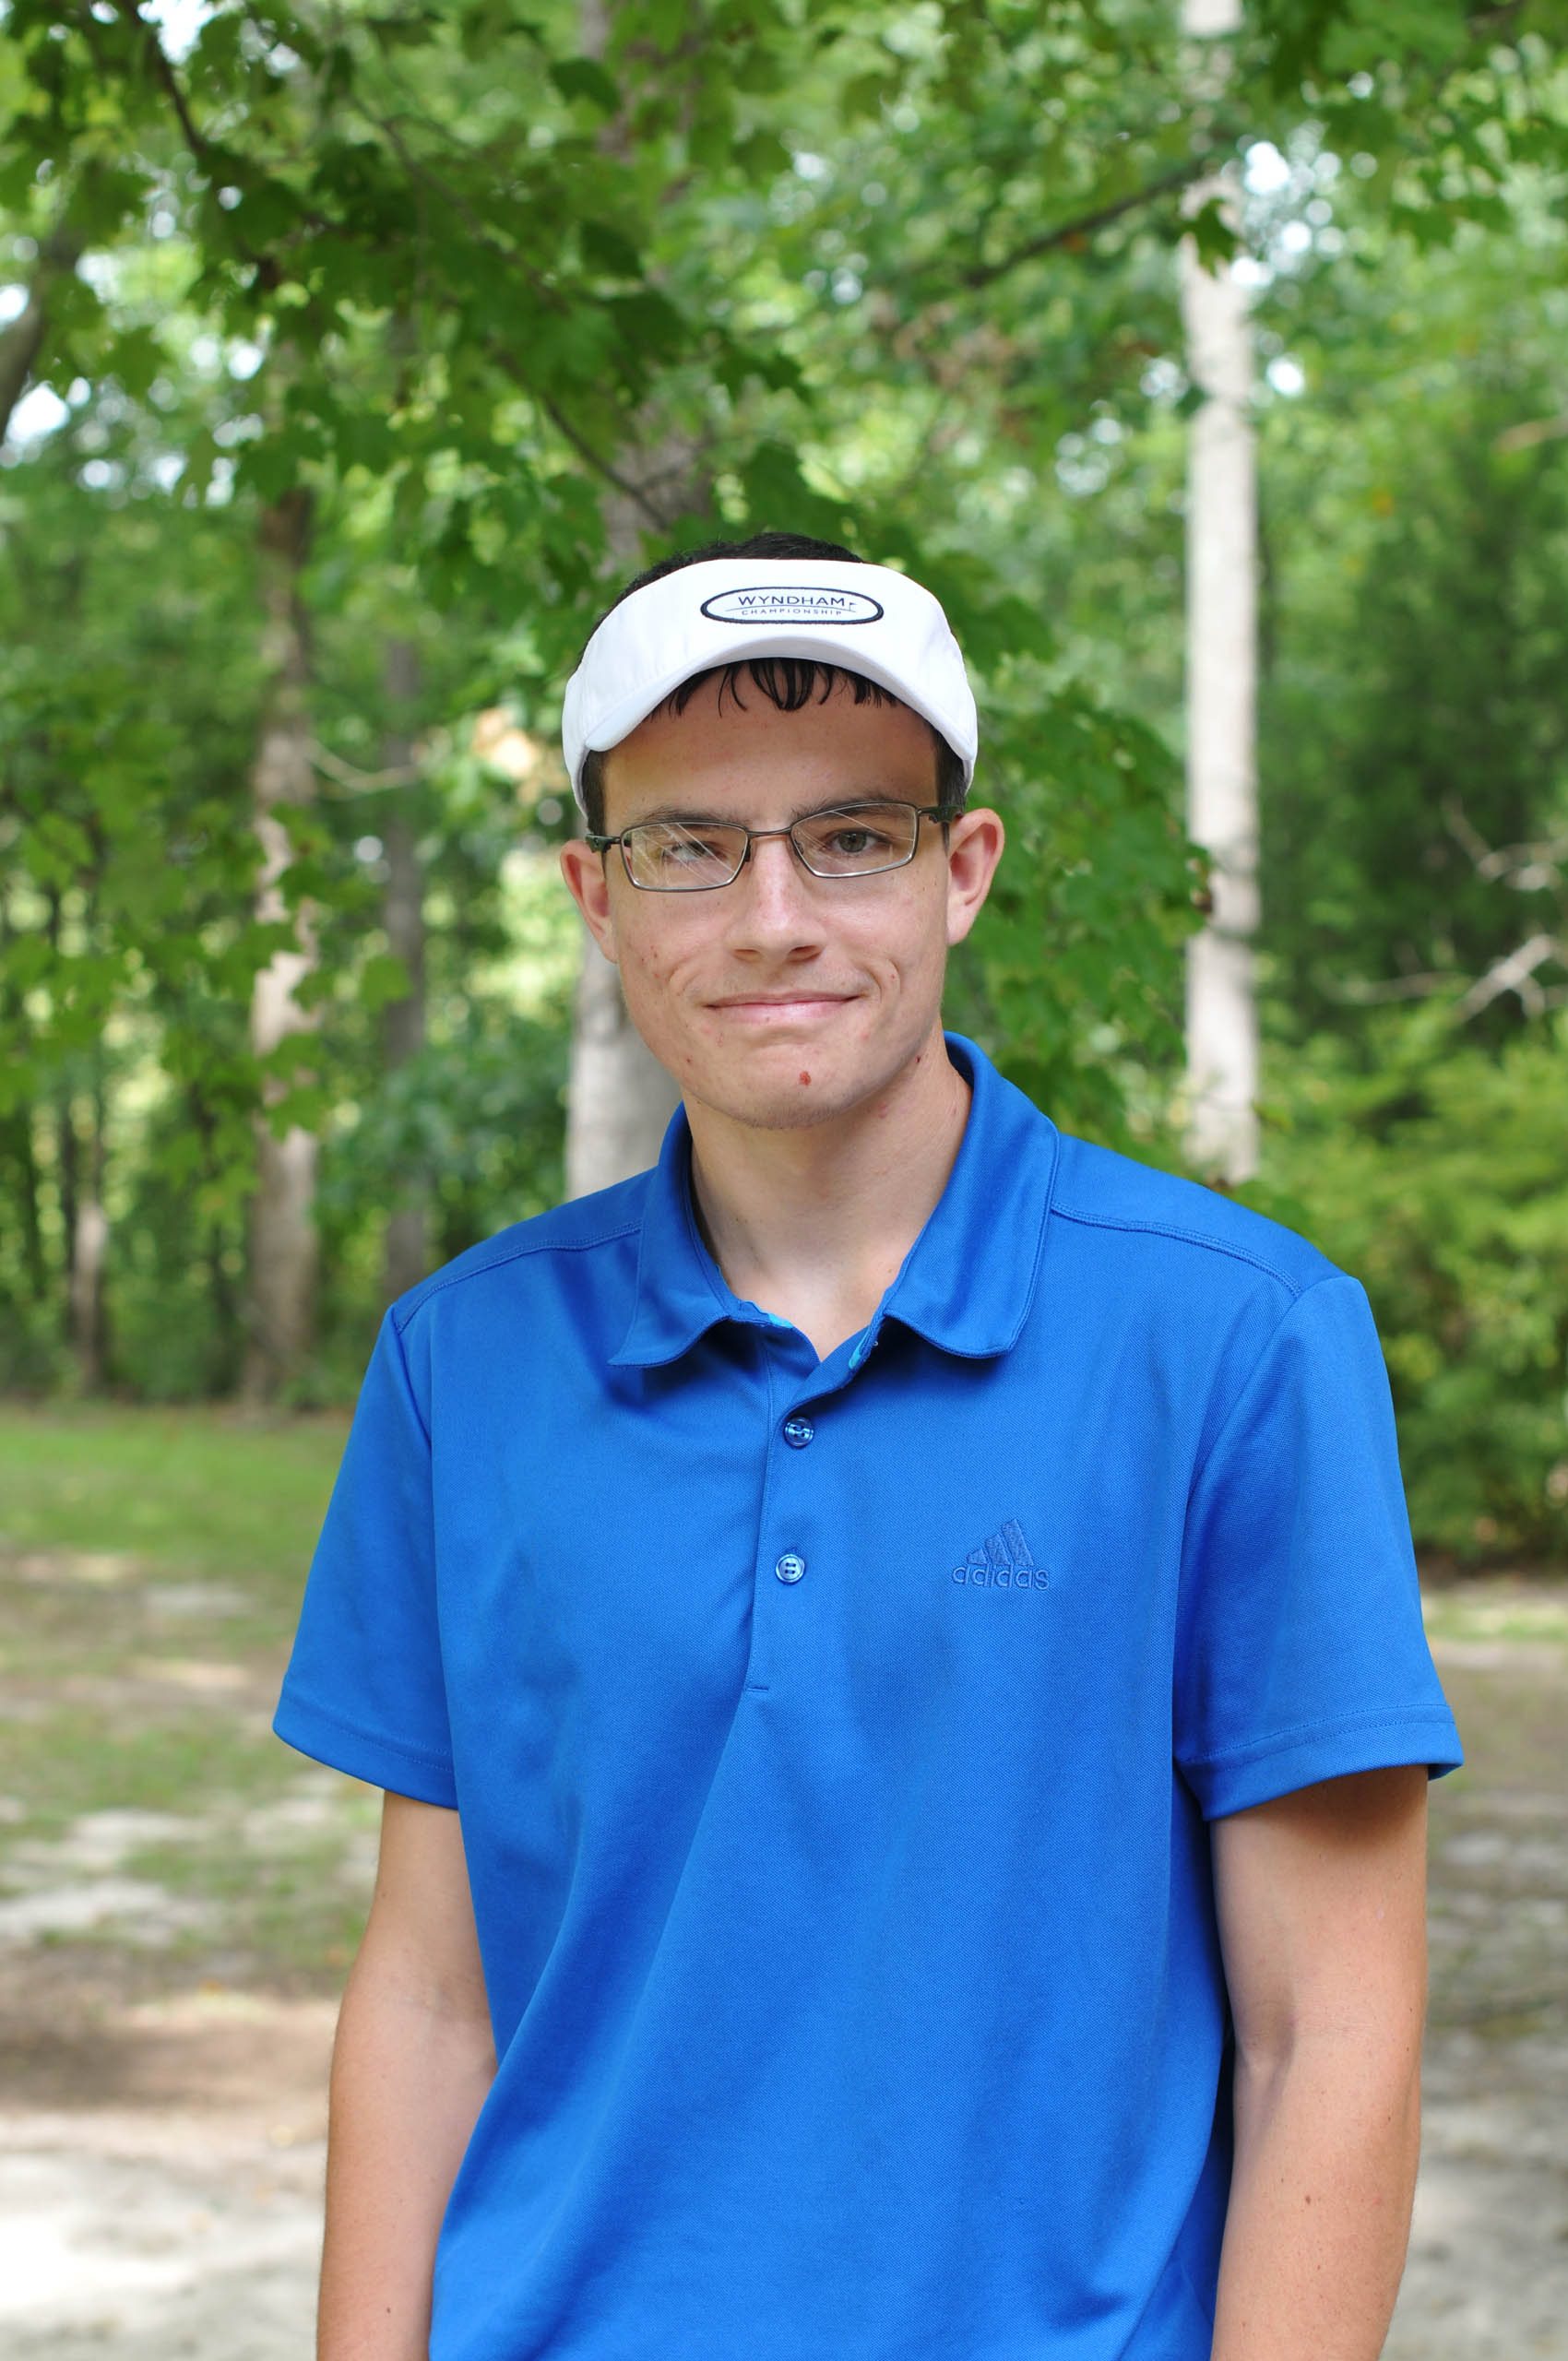 CCCC golfer David Smith gets hole-in-one